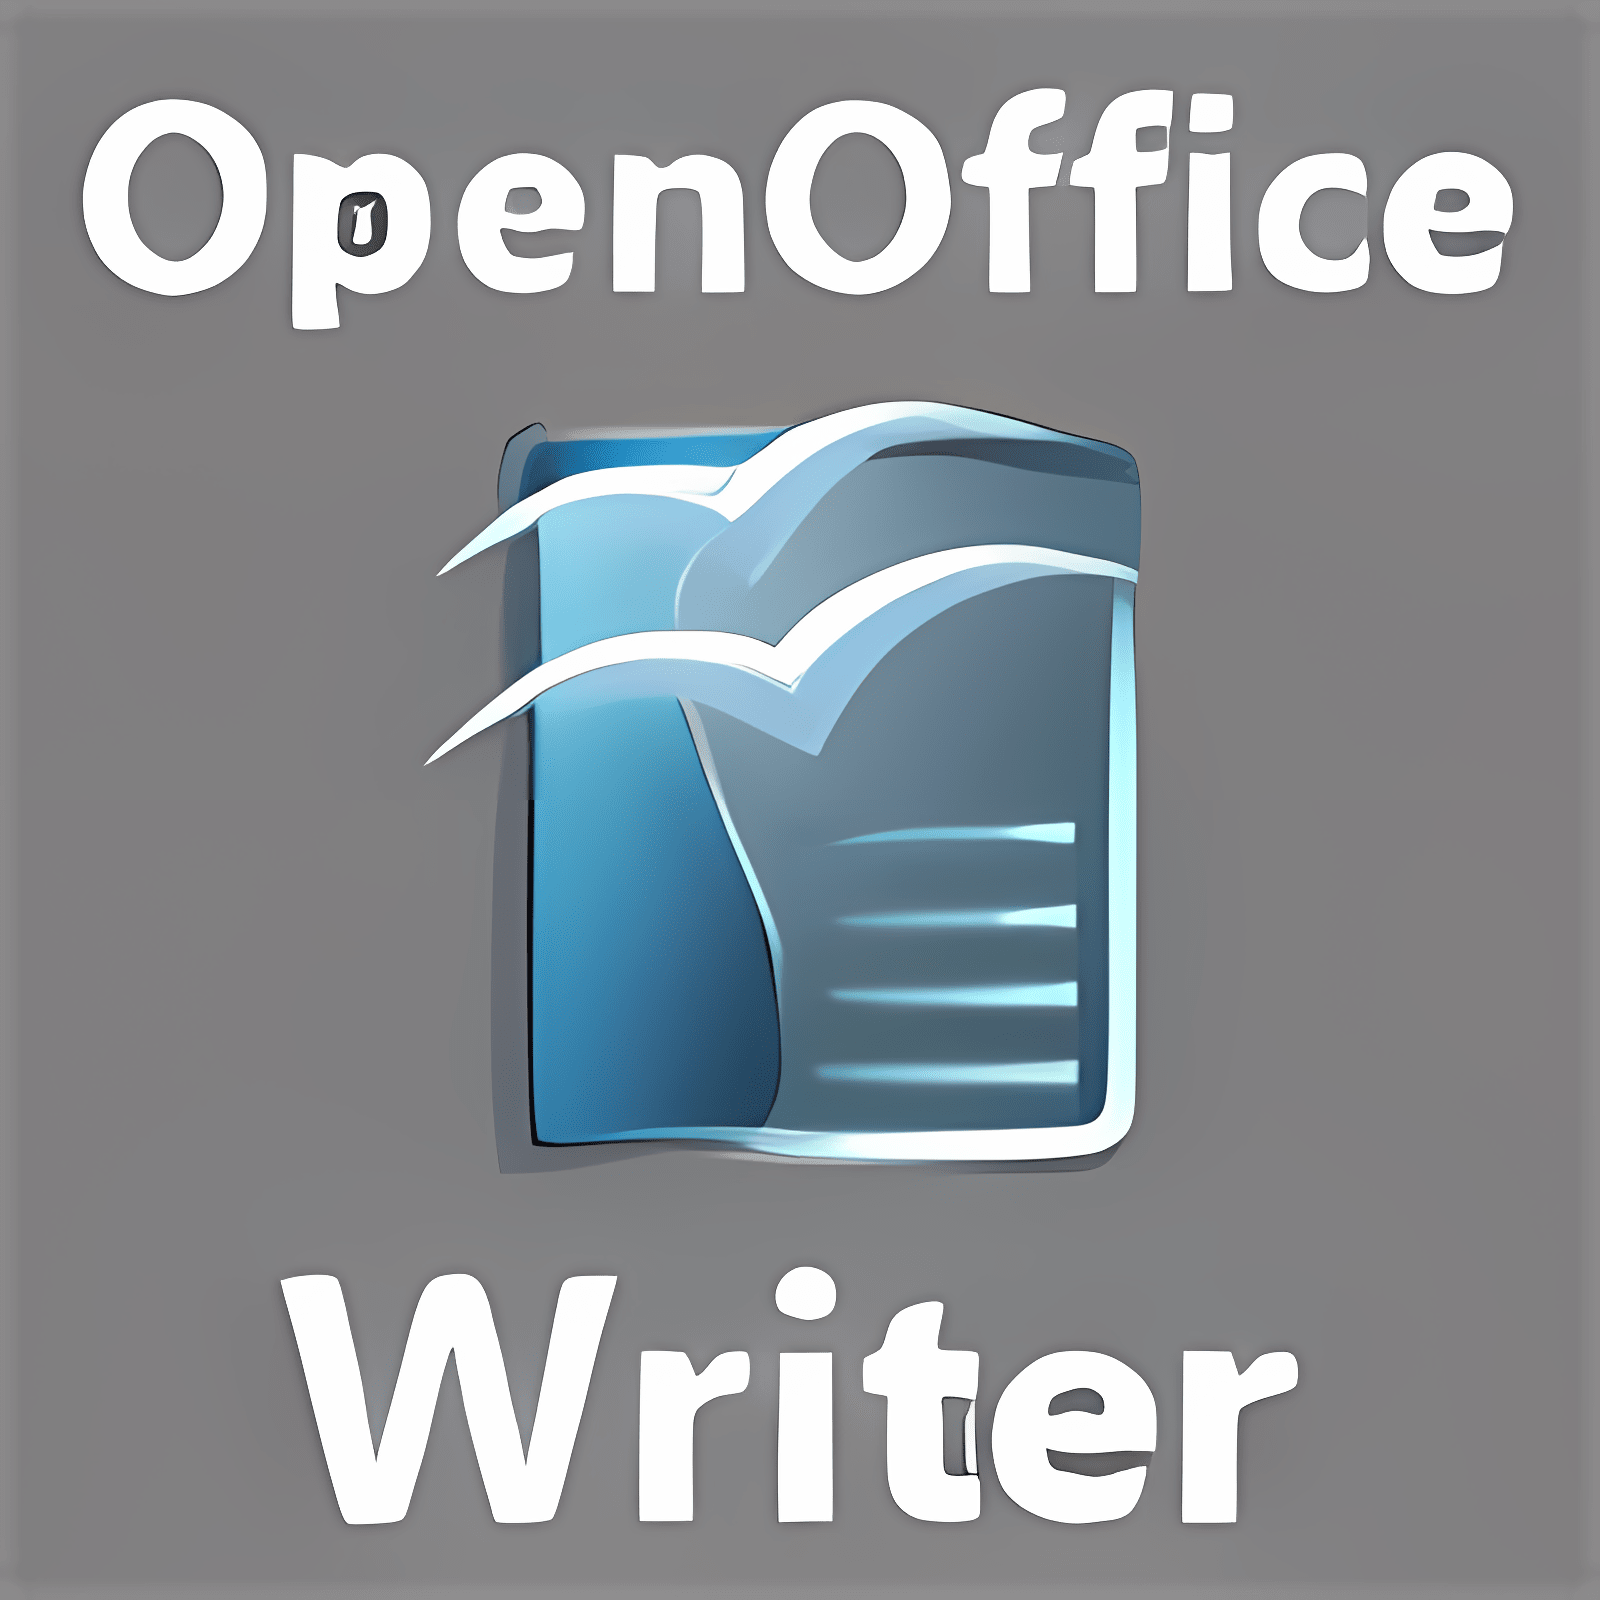 open office writer free download for windows 7